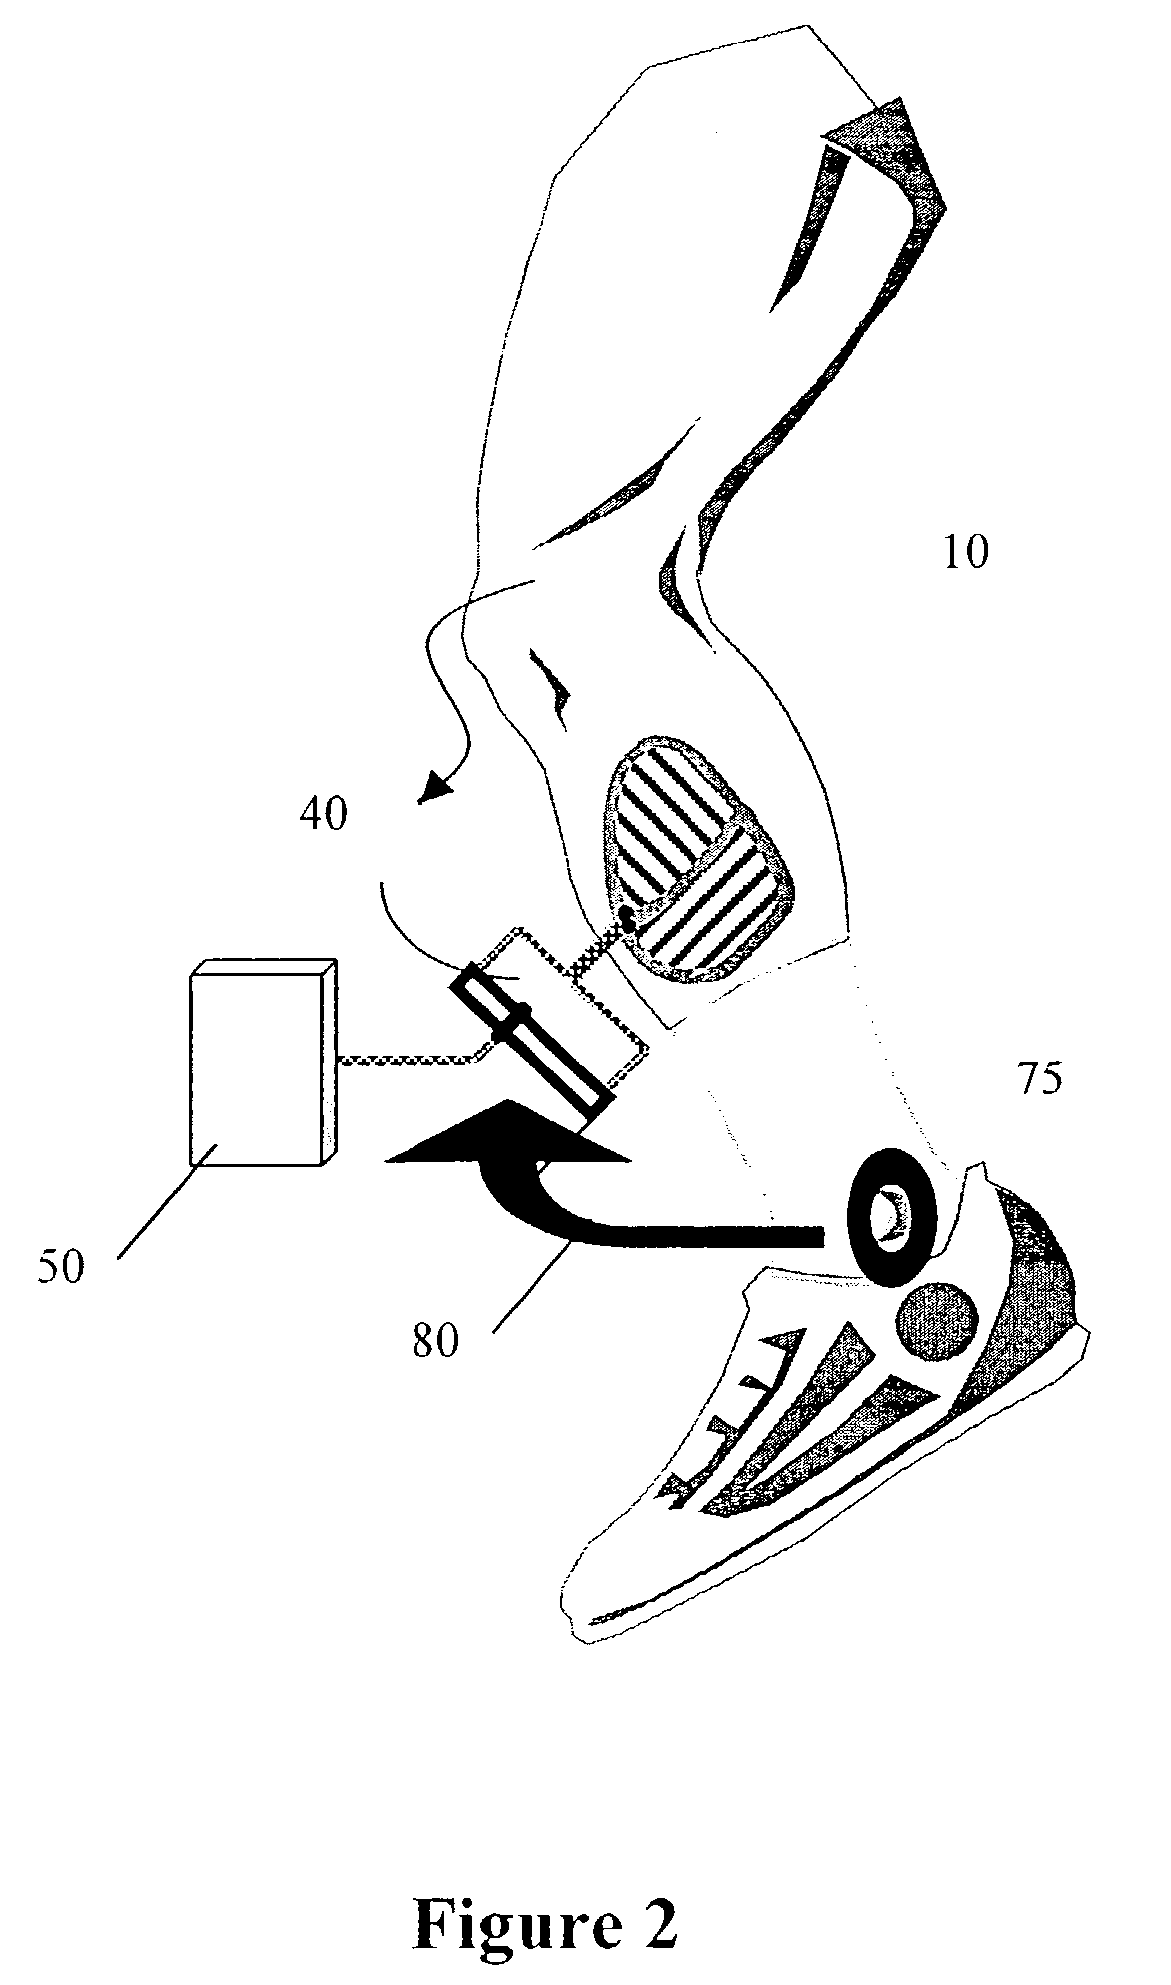 Scanning electrode system for a neuroprosthesis